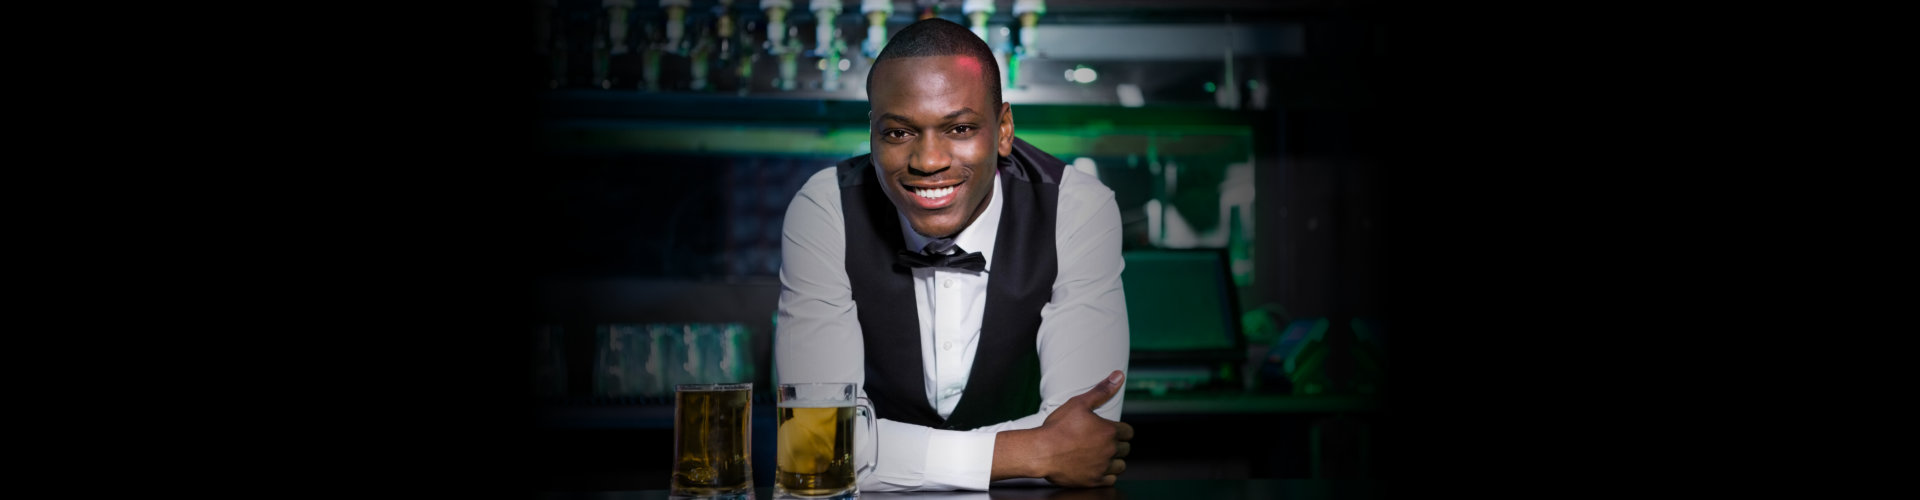 Portrait of bartender leaning and smiling on bar counter